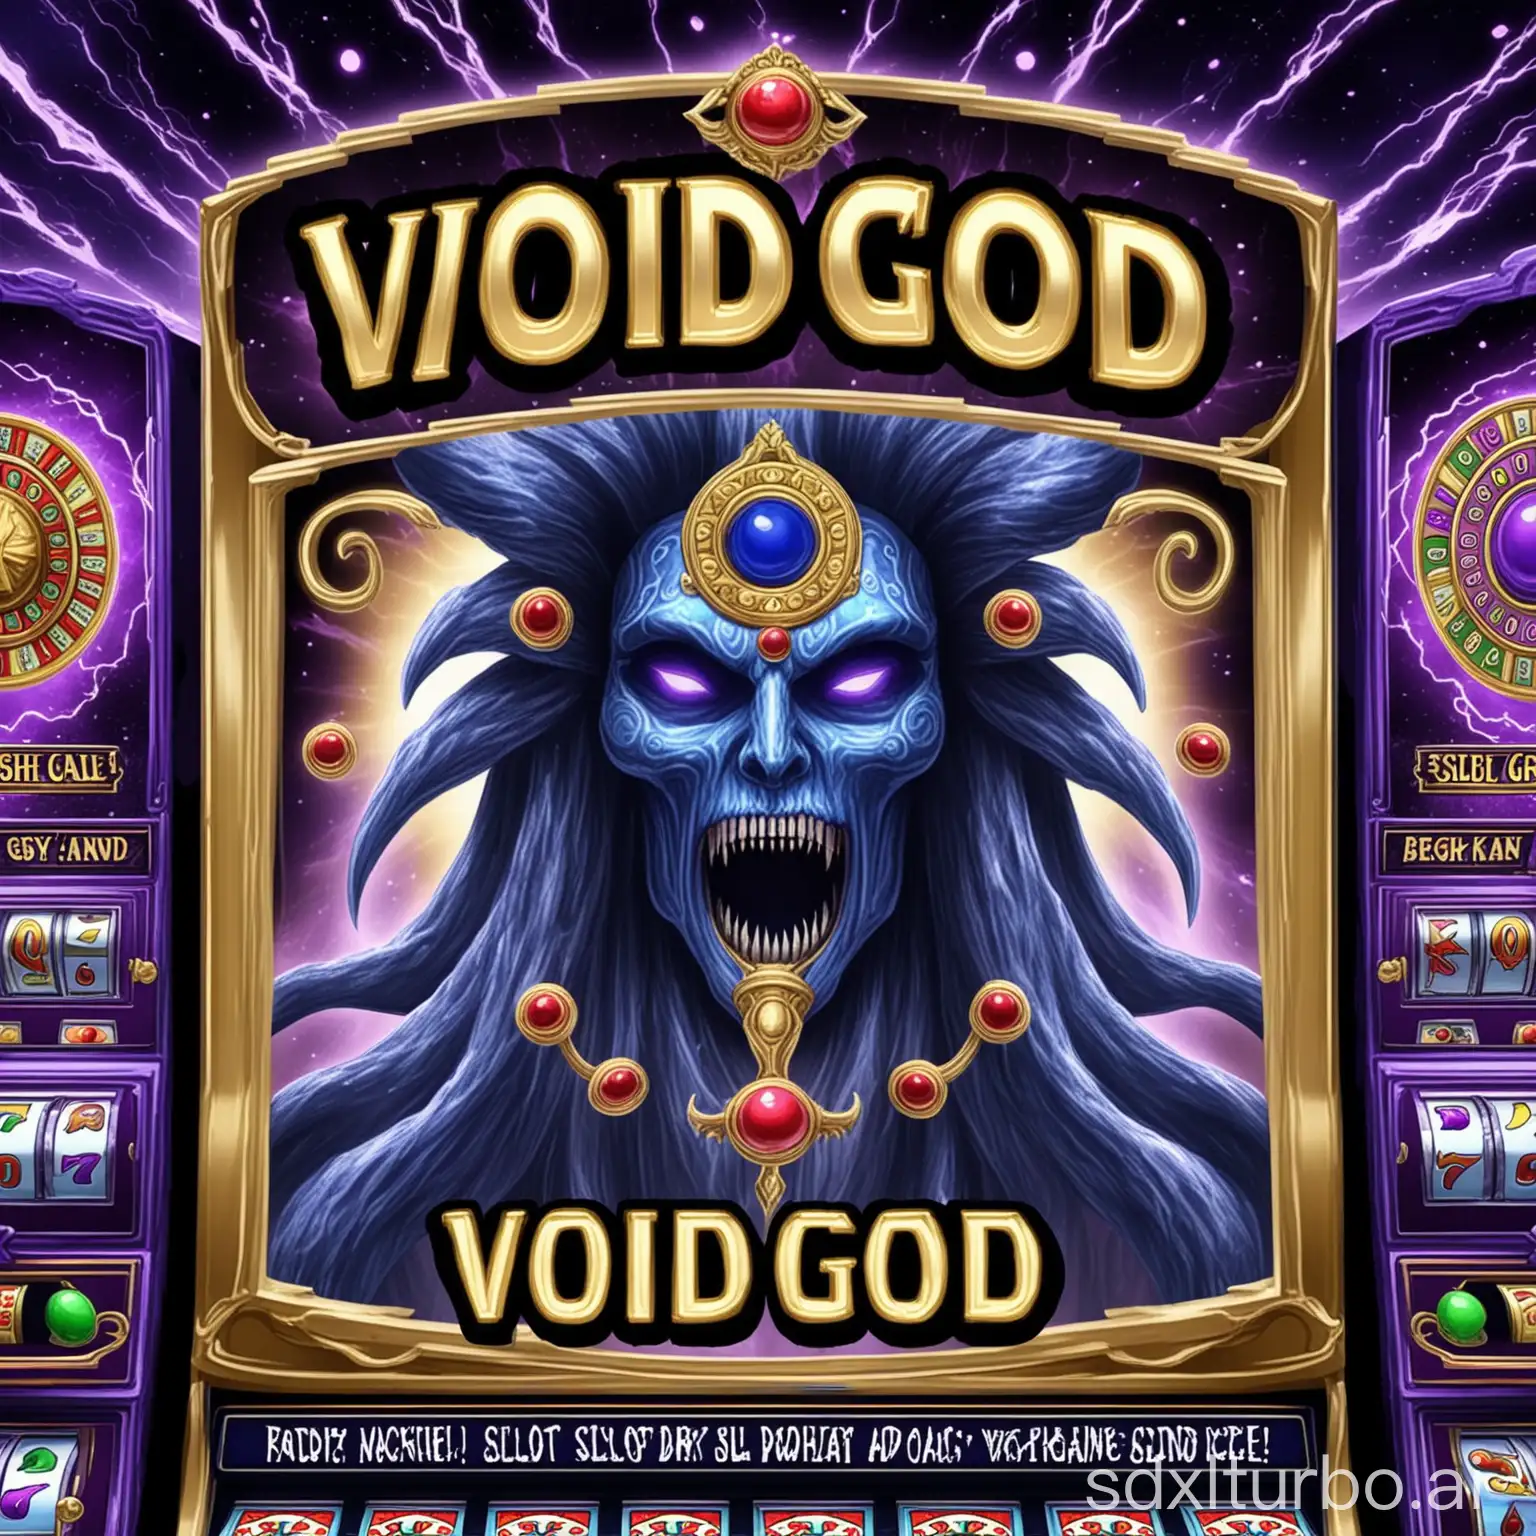 Mystical-Slot-Machine-in-the-Celestial-Void-Online-Gaming-Advertisement